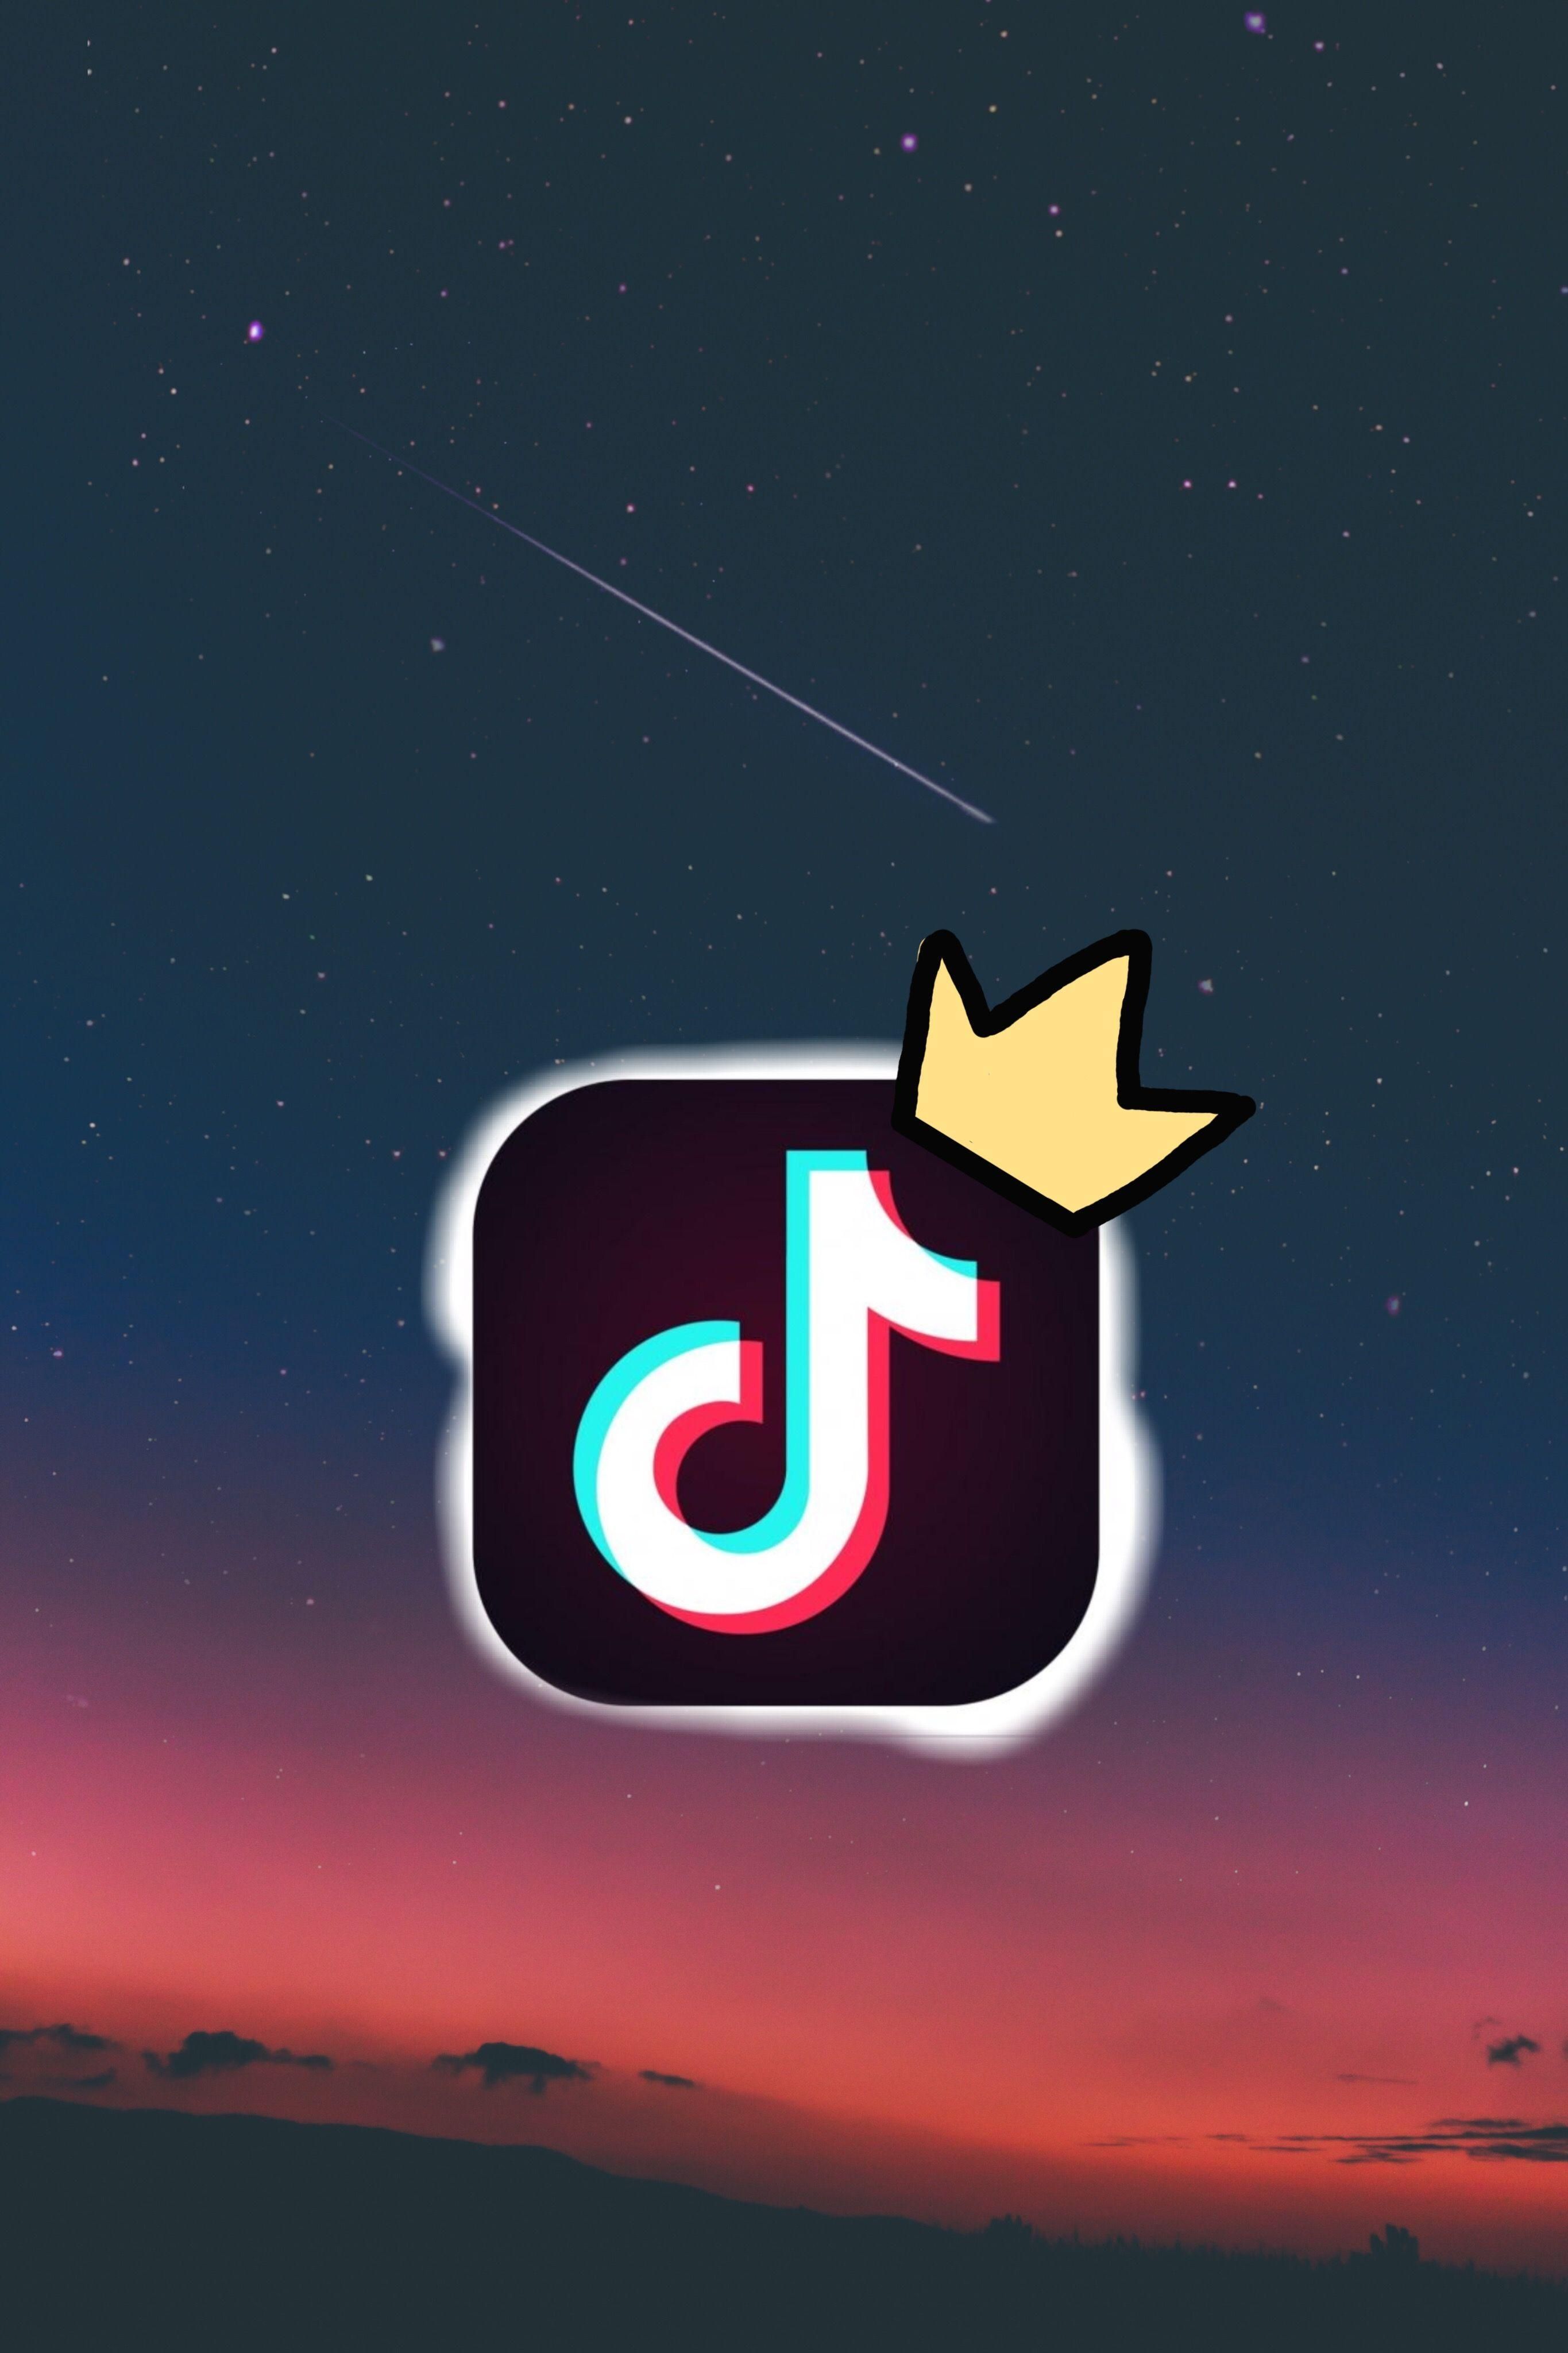 8k wallpapers for iphone｜TikTok Search